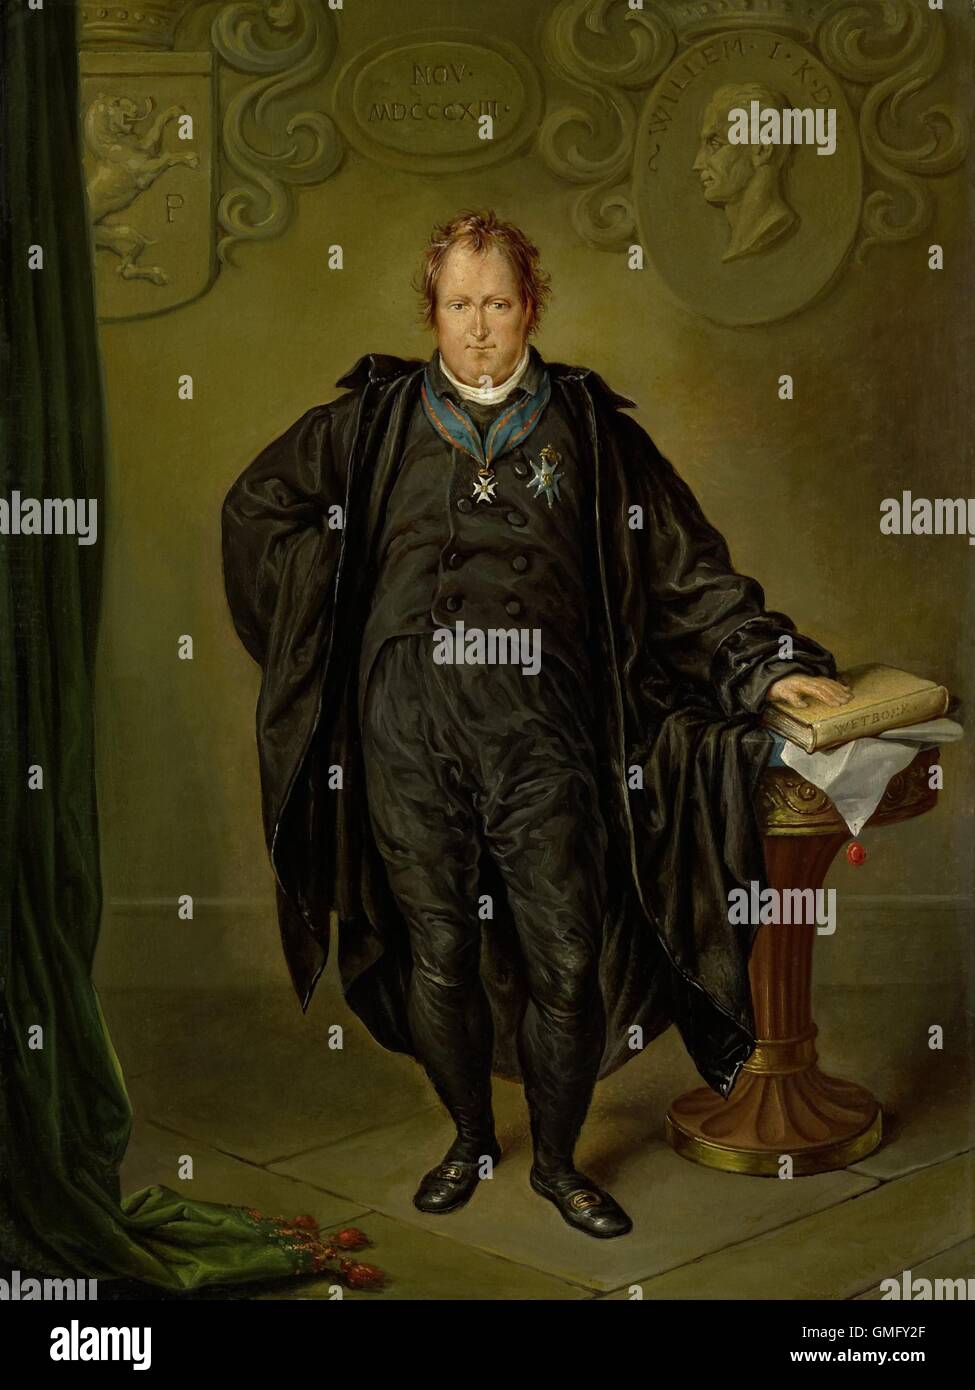 Portrait of Johan Melchior Kemper, Lawyer and Statesman, by David Pierre Giottino Humbert de Superville, c. 1815, Dutch painting, oil on panel. He wears insignia of Commander of the Order of the Dutch Lion. On the wall is a relief portrait of King William I (BSLOC 2016 2 67) Stock Photo